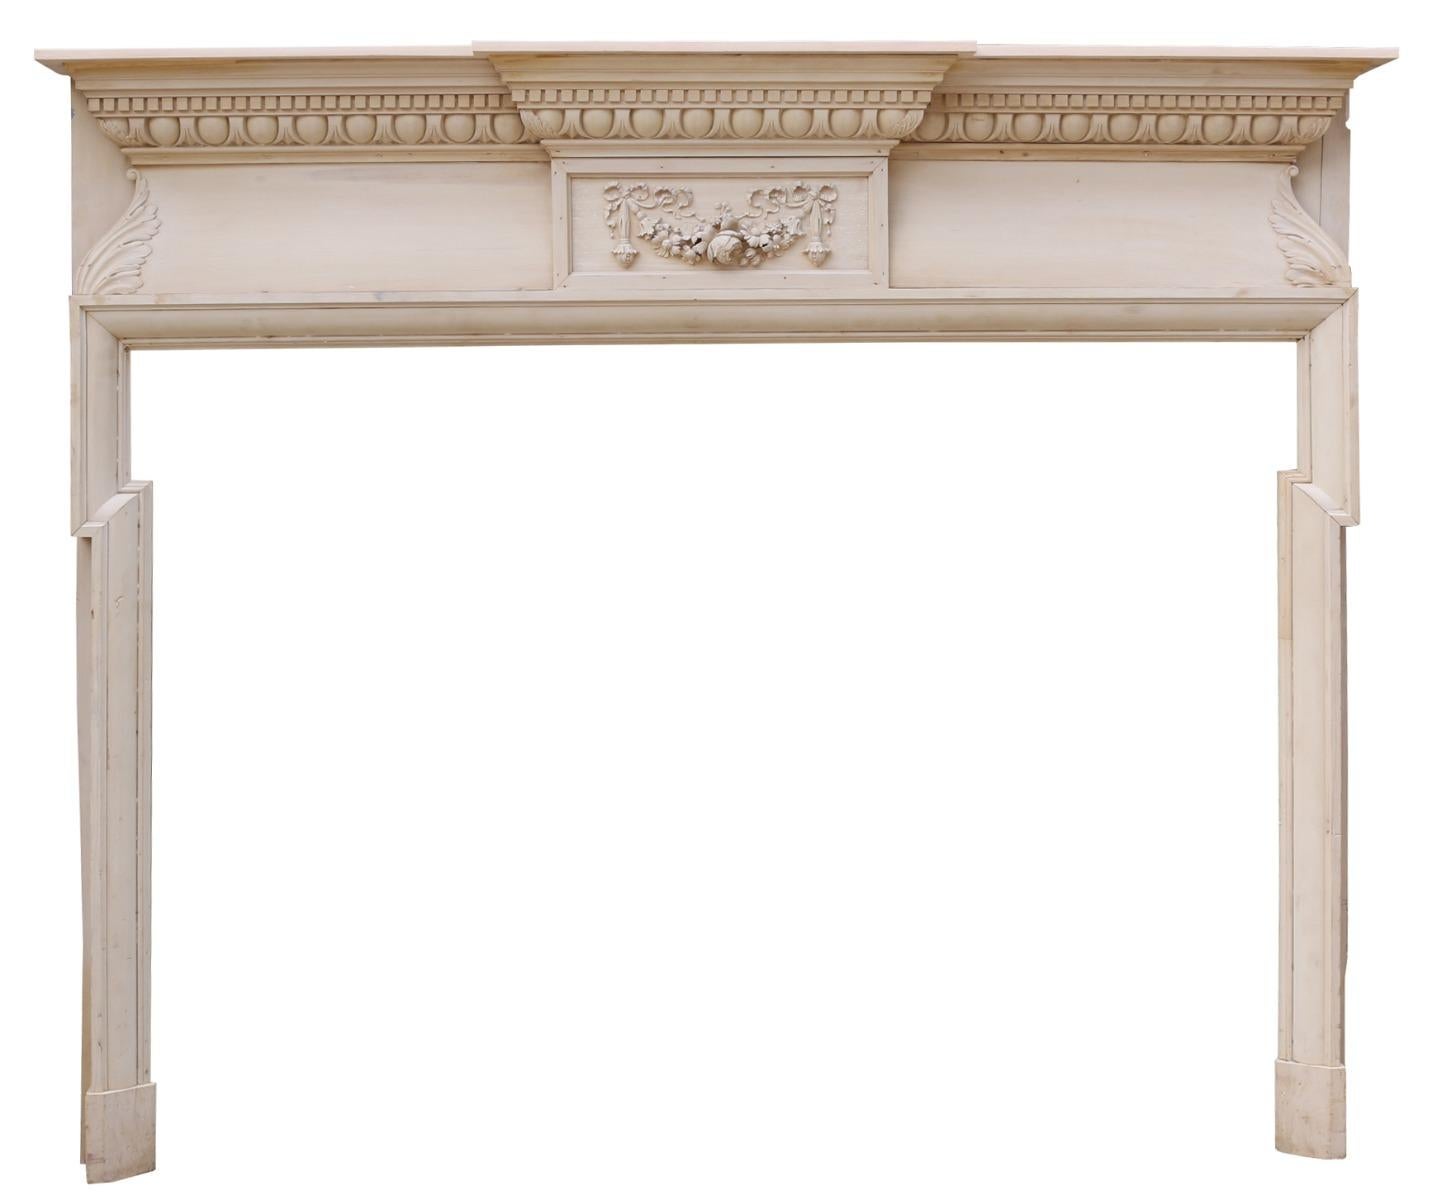 This fire surround was reclaimed from a property in Edinburgh.

Meaning: Opening Height 115.5 cm

Opening Width 161.5 cm.